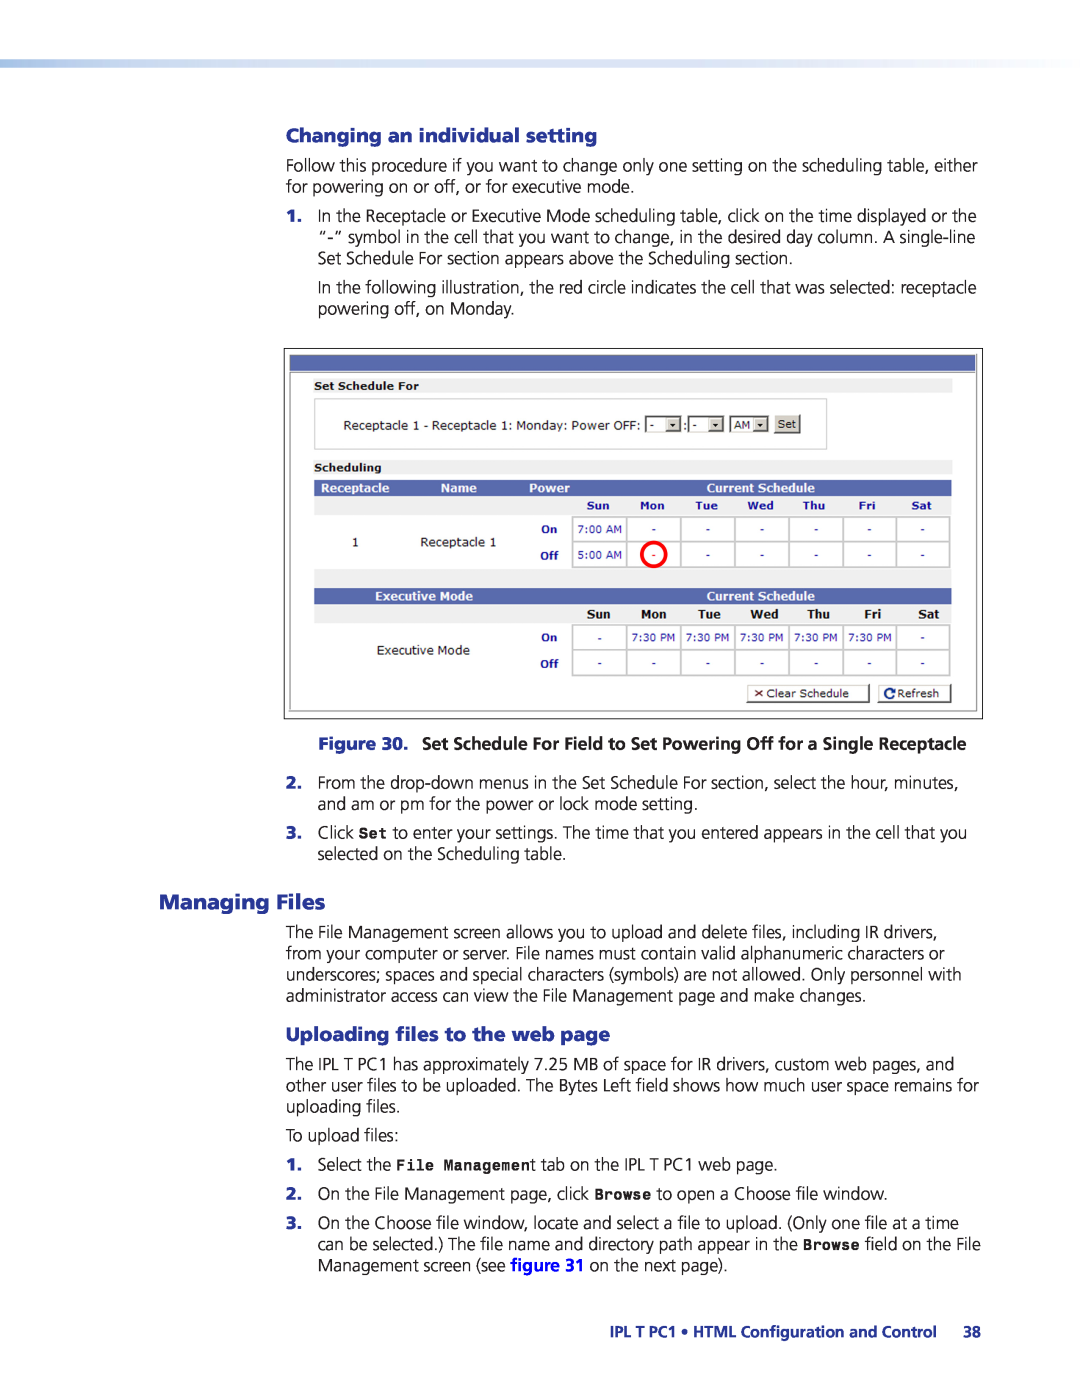 Extron electronic IPL T PC1i manual Managing Files, Changing an individual setting, Uploading files to the web page 